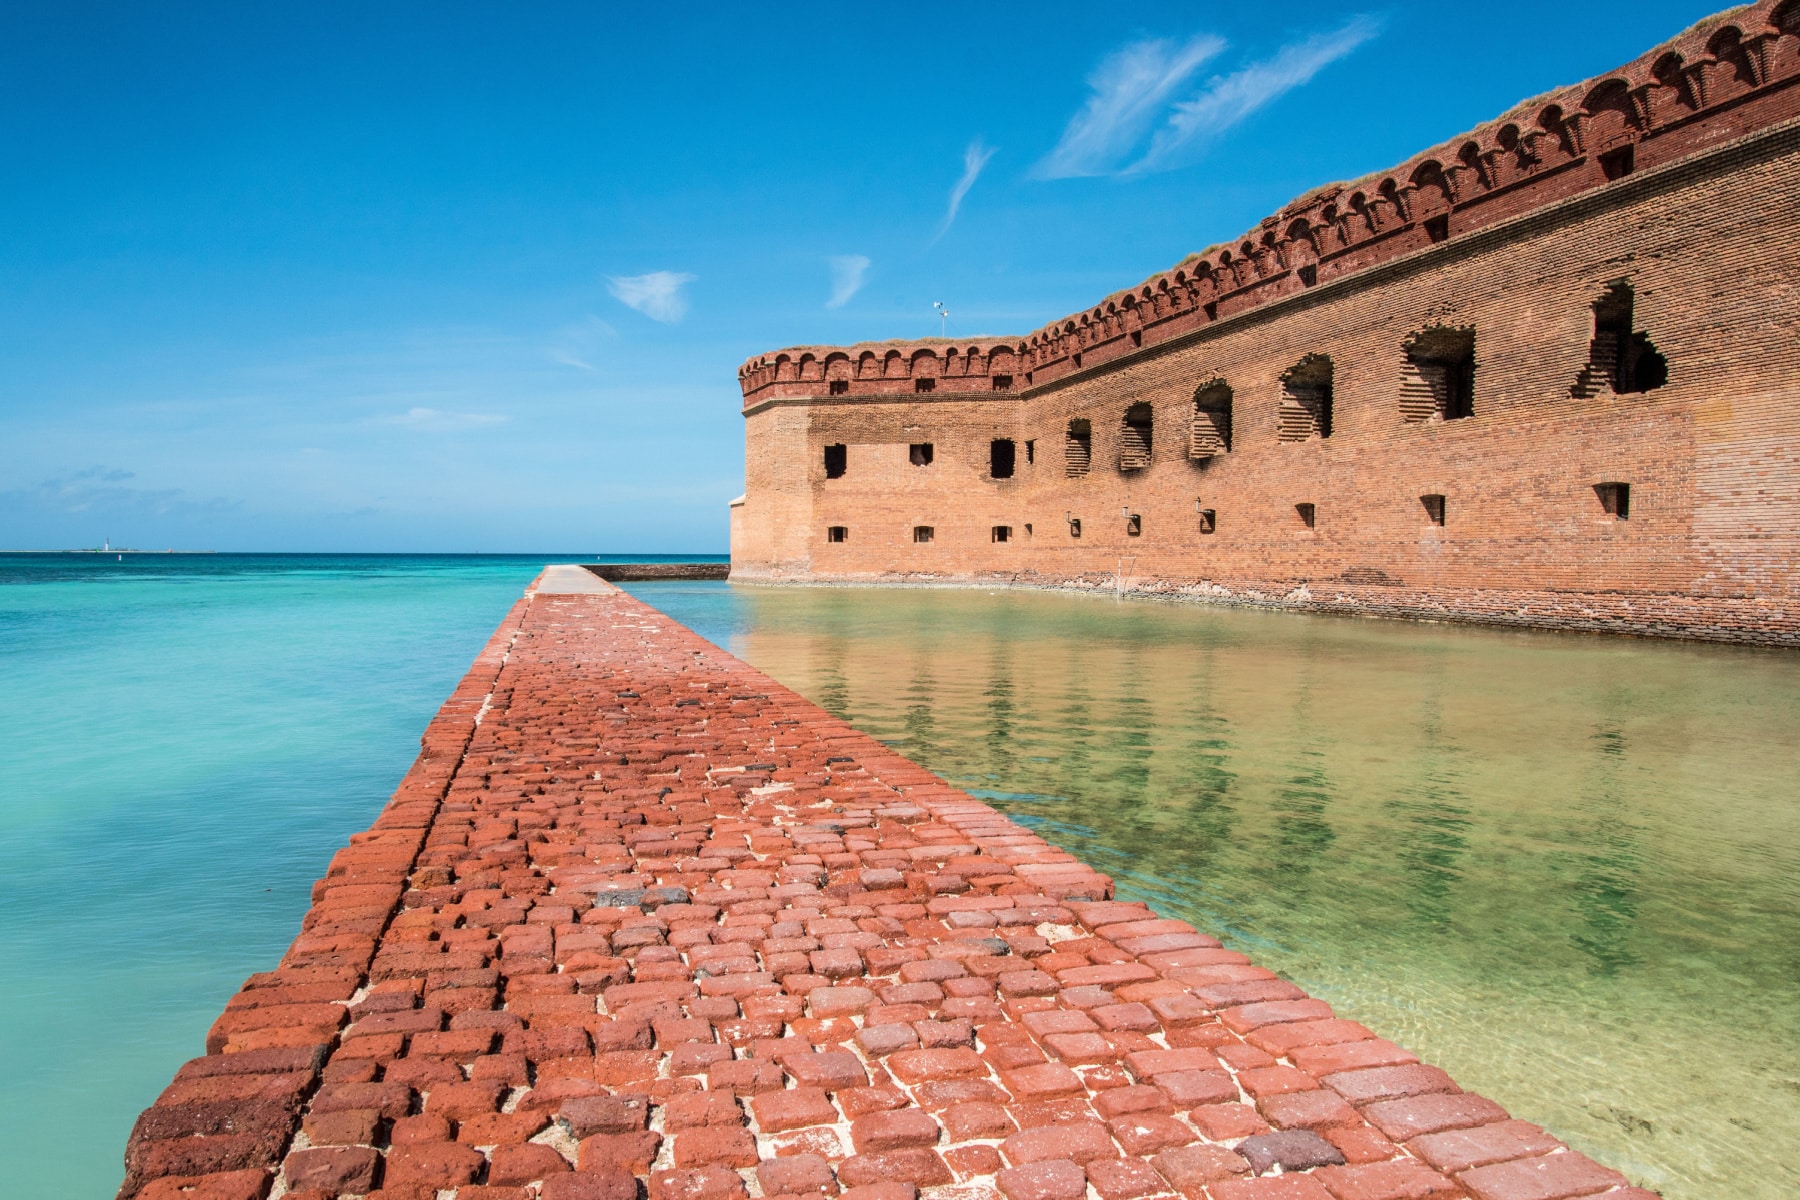 Moat Wall at Fort Jefferson in Dry Tortugas National Park